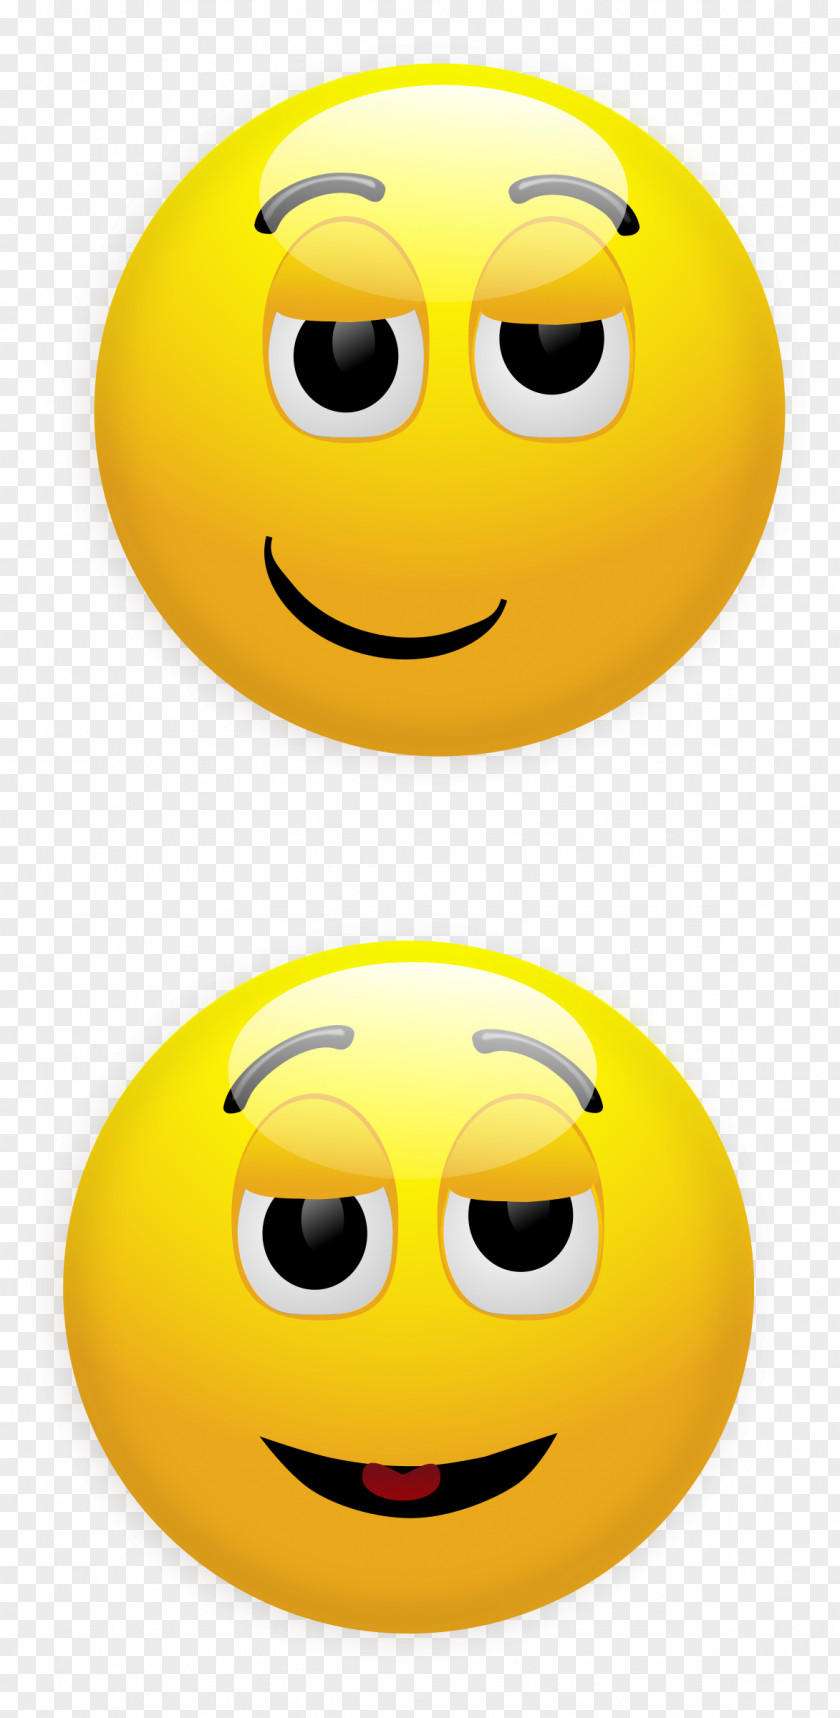 Mouth Smile Smiley Emoticon Clip Art PNG